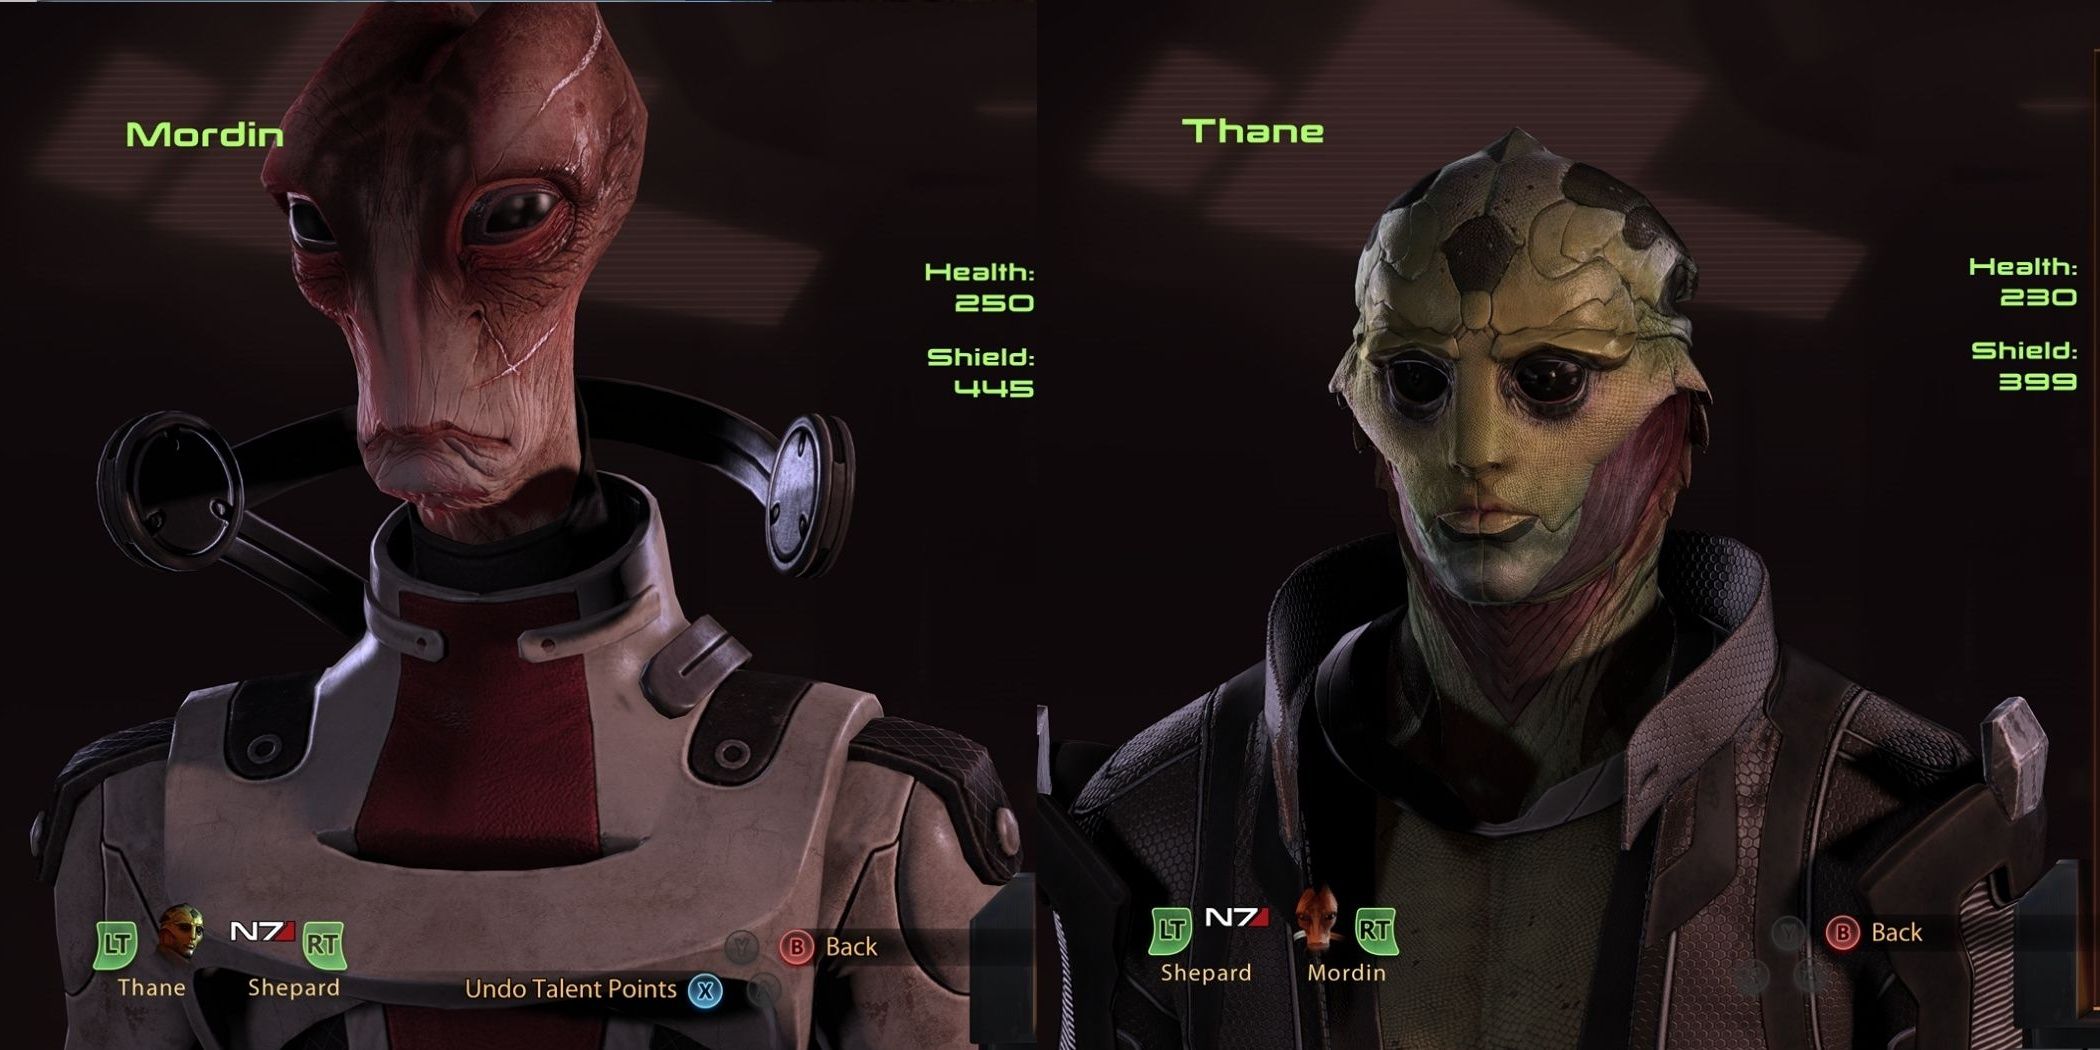 Mass Effect 2 Mordin and Thane Talent Selection Screen Images